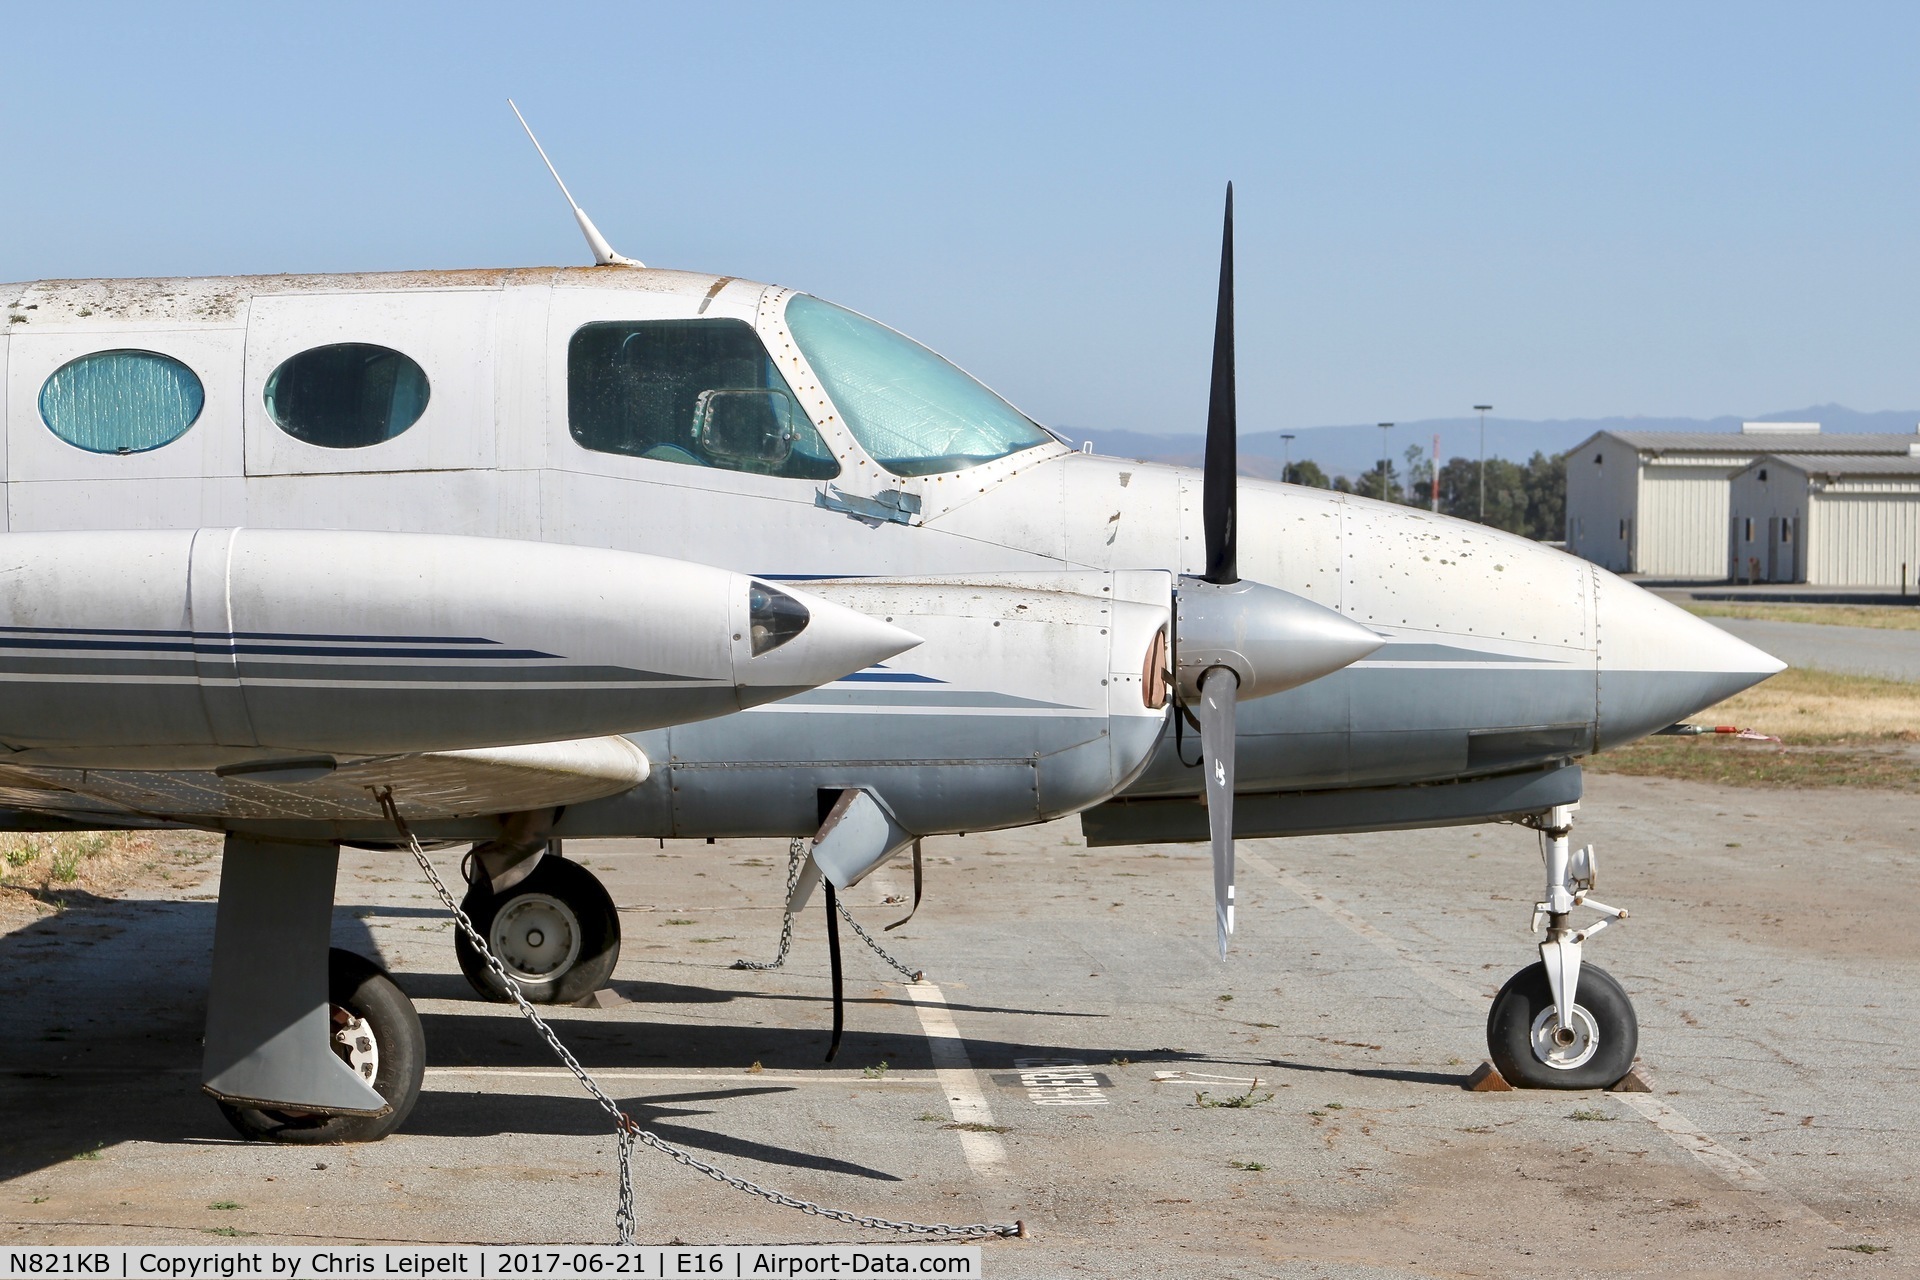 N821KB, 1966 Cessna 411 C/N 411-0201, Locally-based 1966 Cessna 411 parked and rotting on the ramp at San Martin Airport, CA.